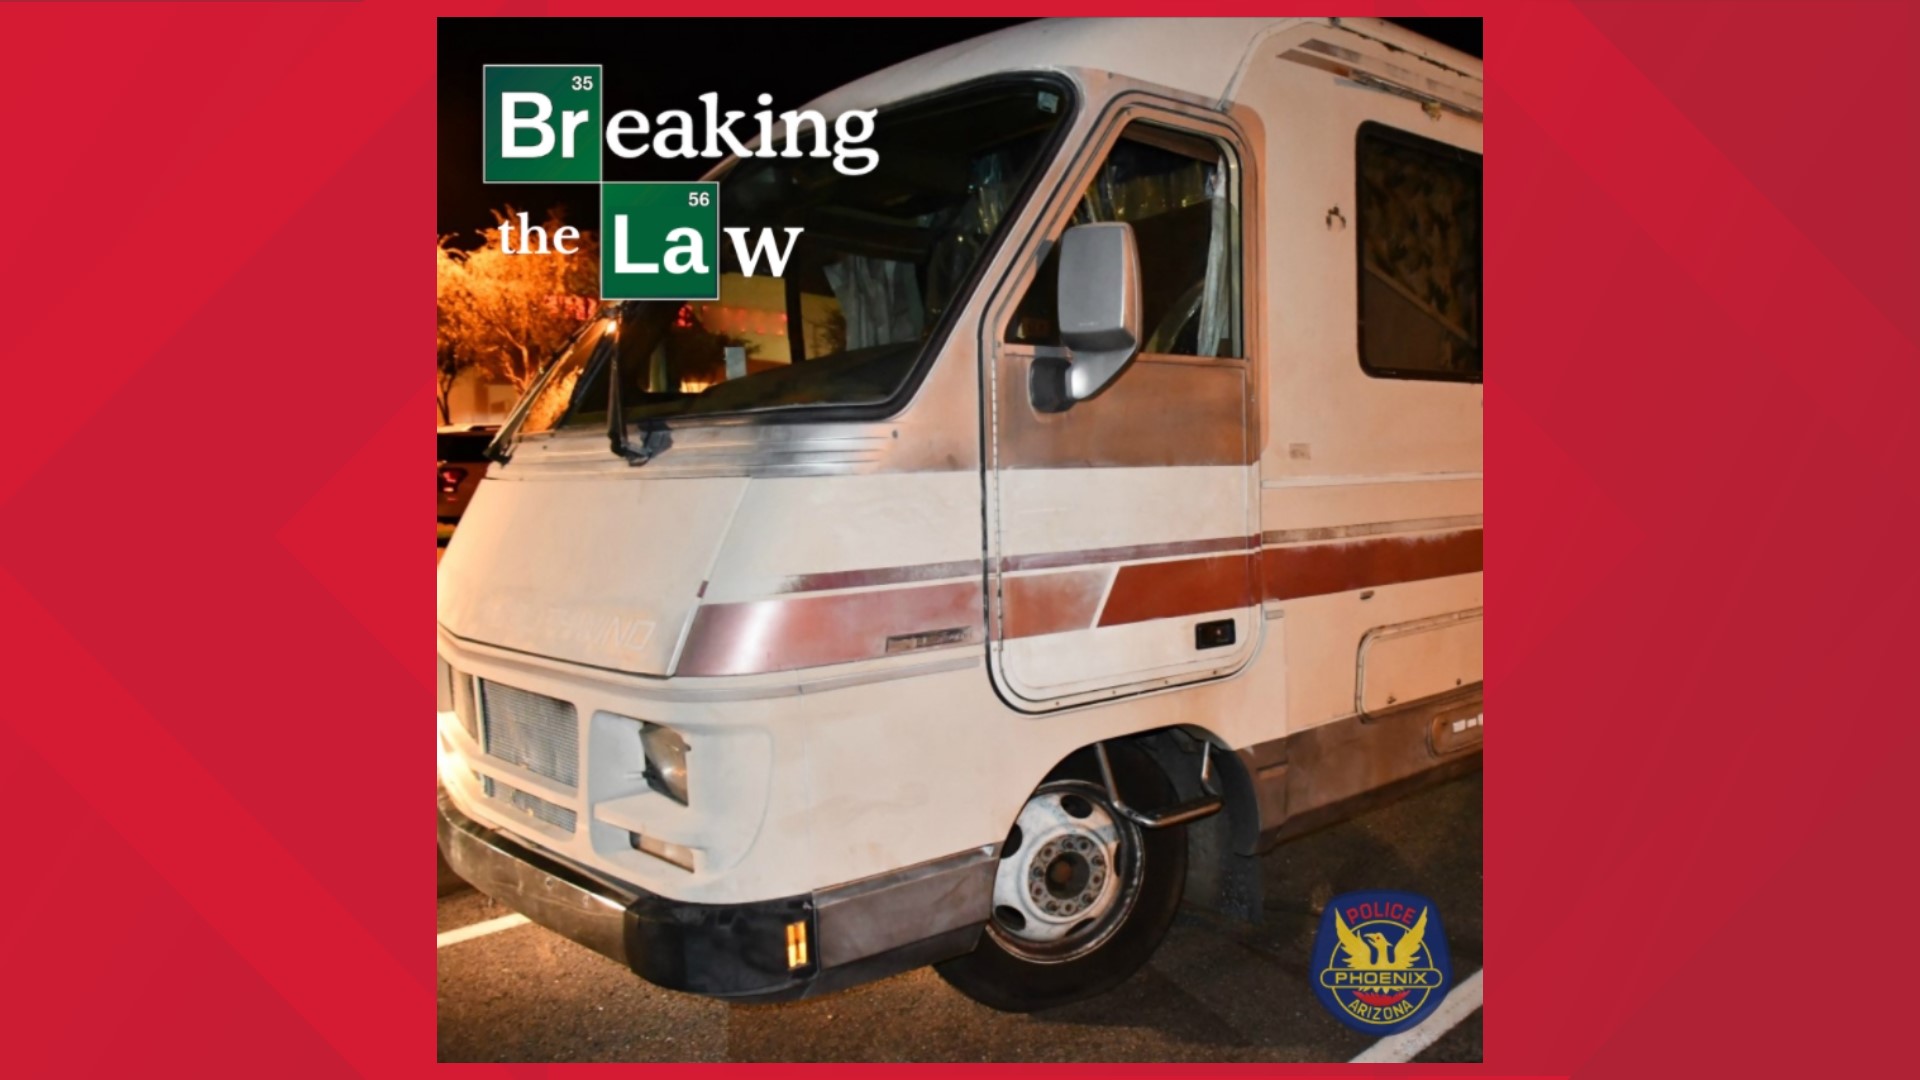 A 38-year-old man was arrested last week after police found a "Breaking Bad" style mobile meth lab in Maryvale. The suspect, Jan Vose, 38, is the owner of the RV.